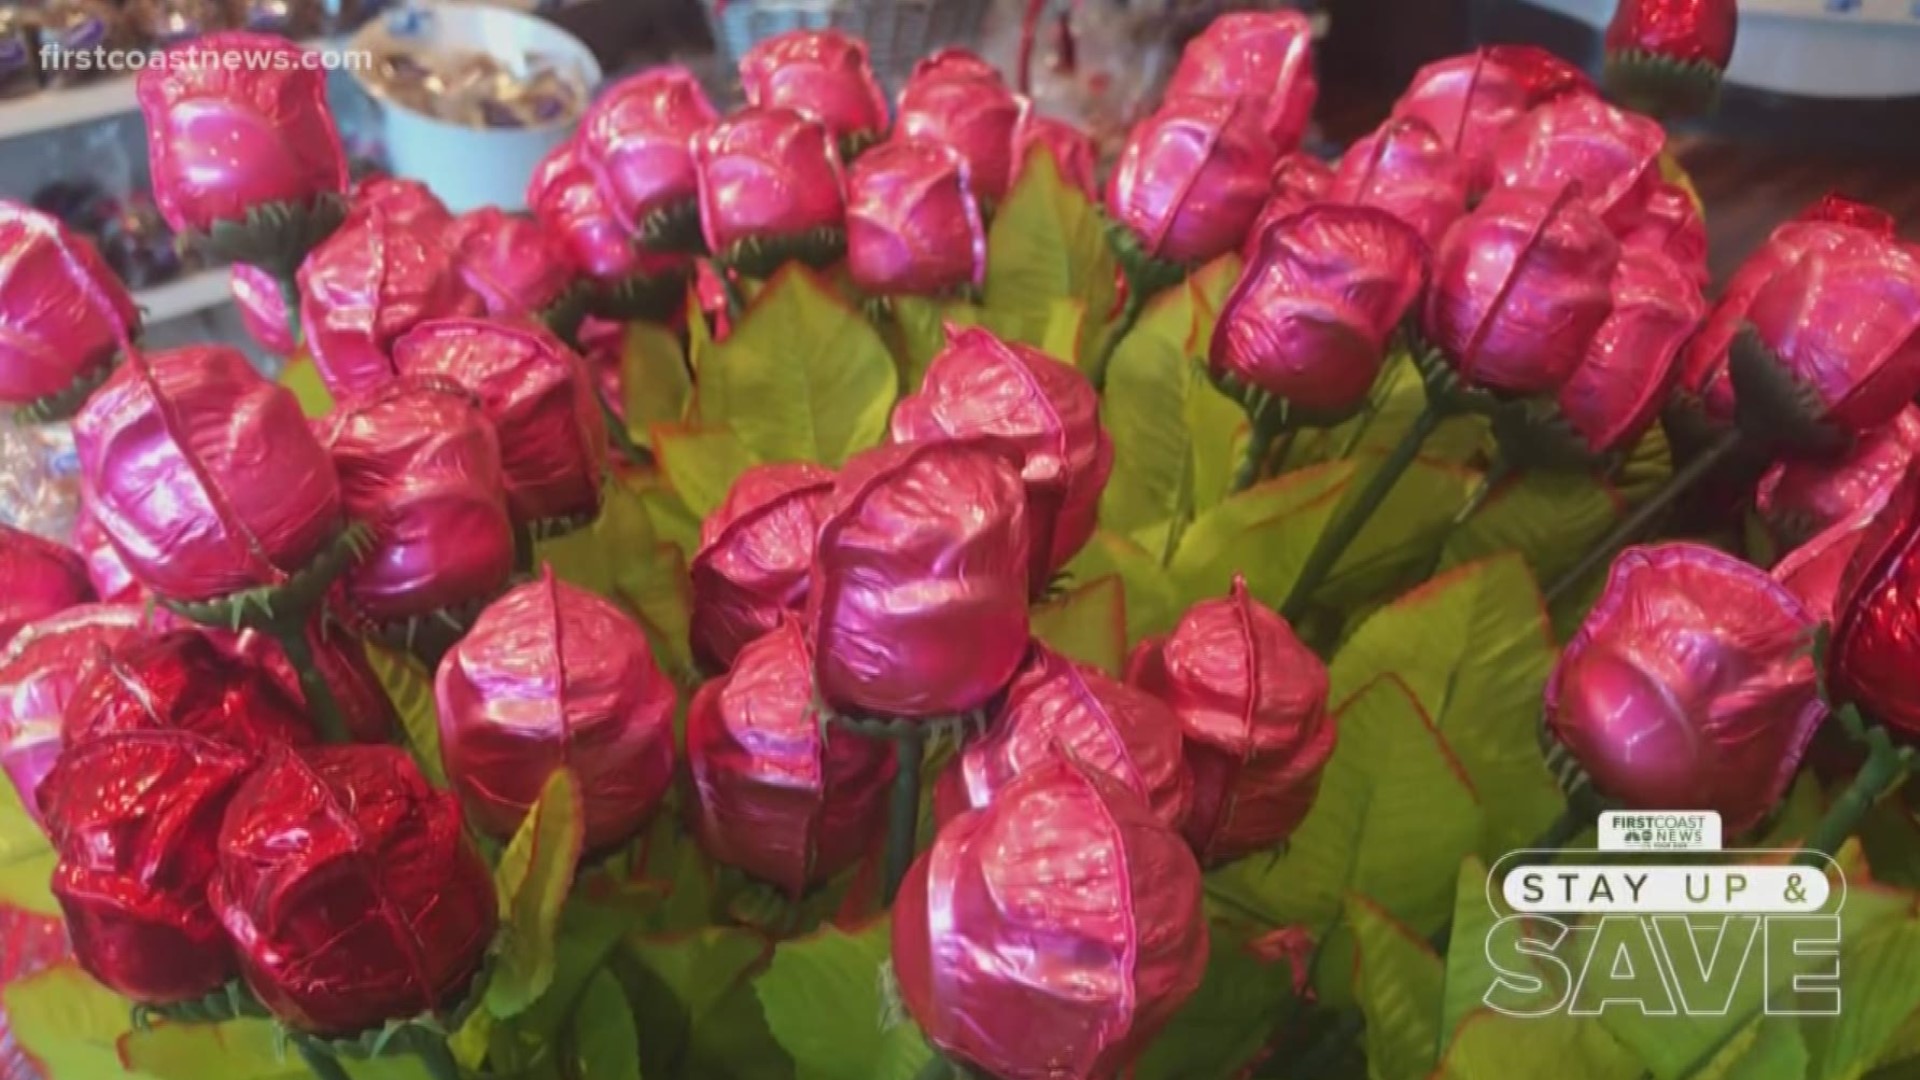 Here's how you can buy flowers for your Valentine without breaking the bank.